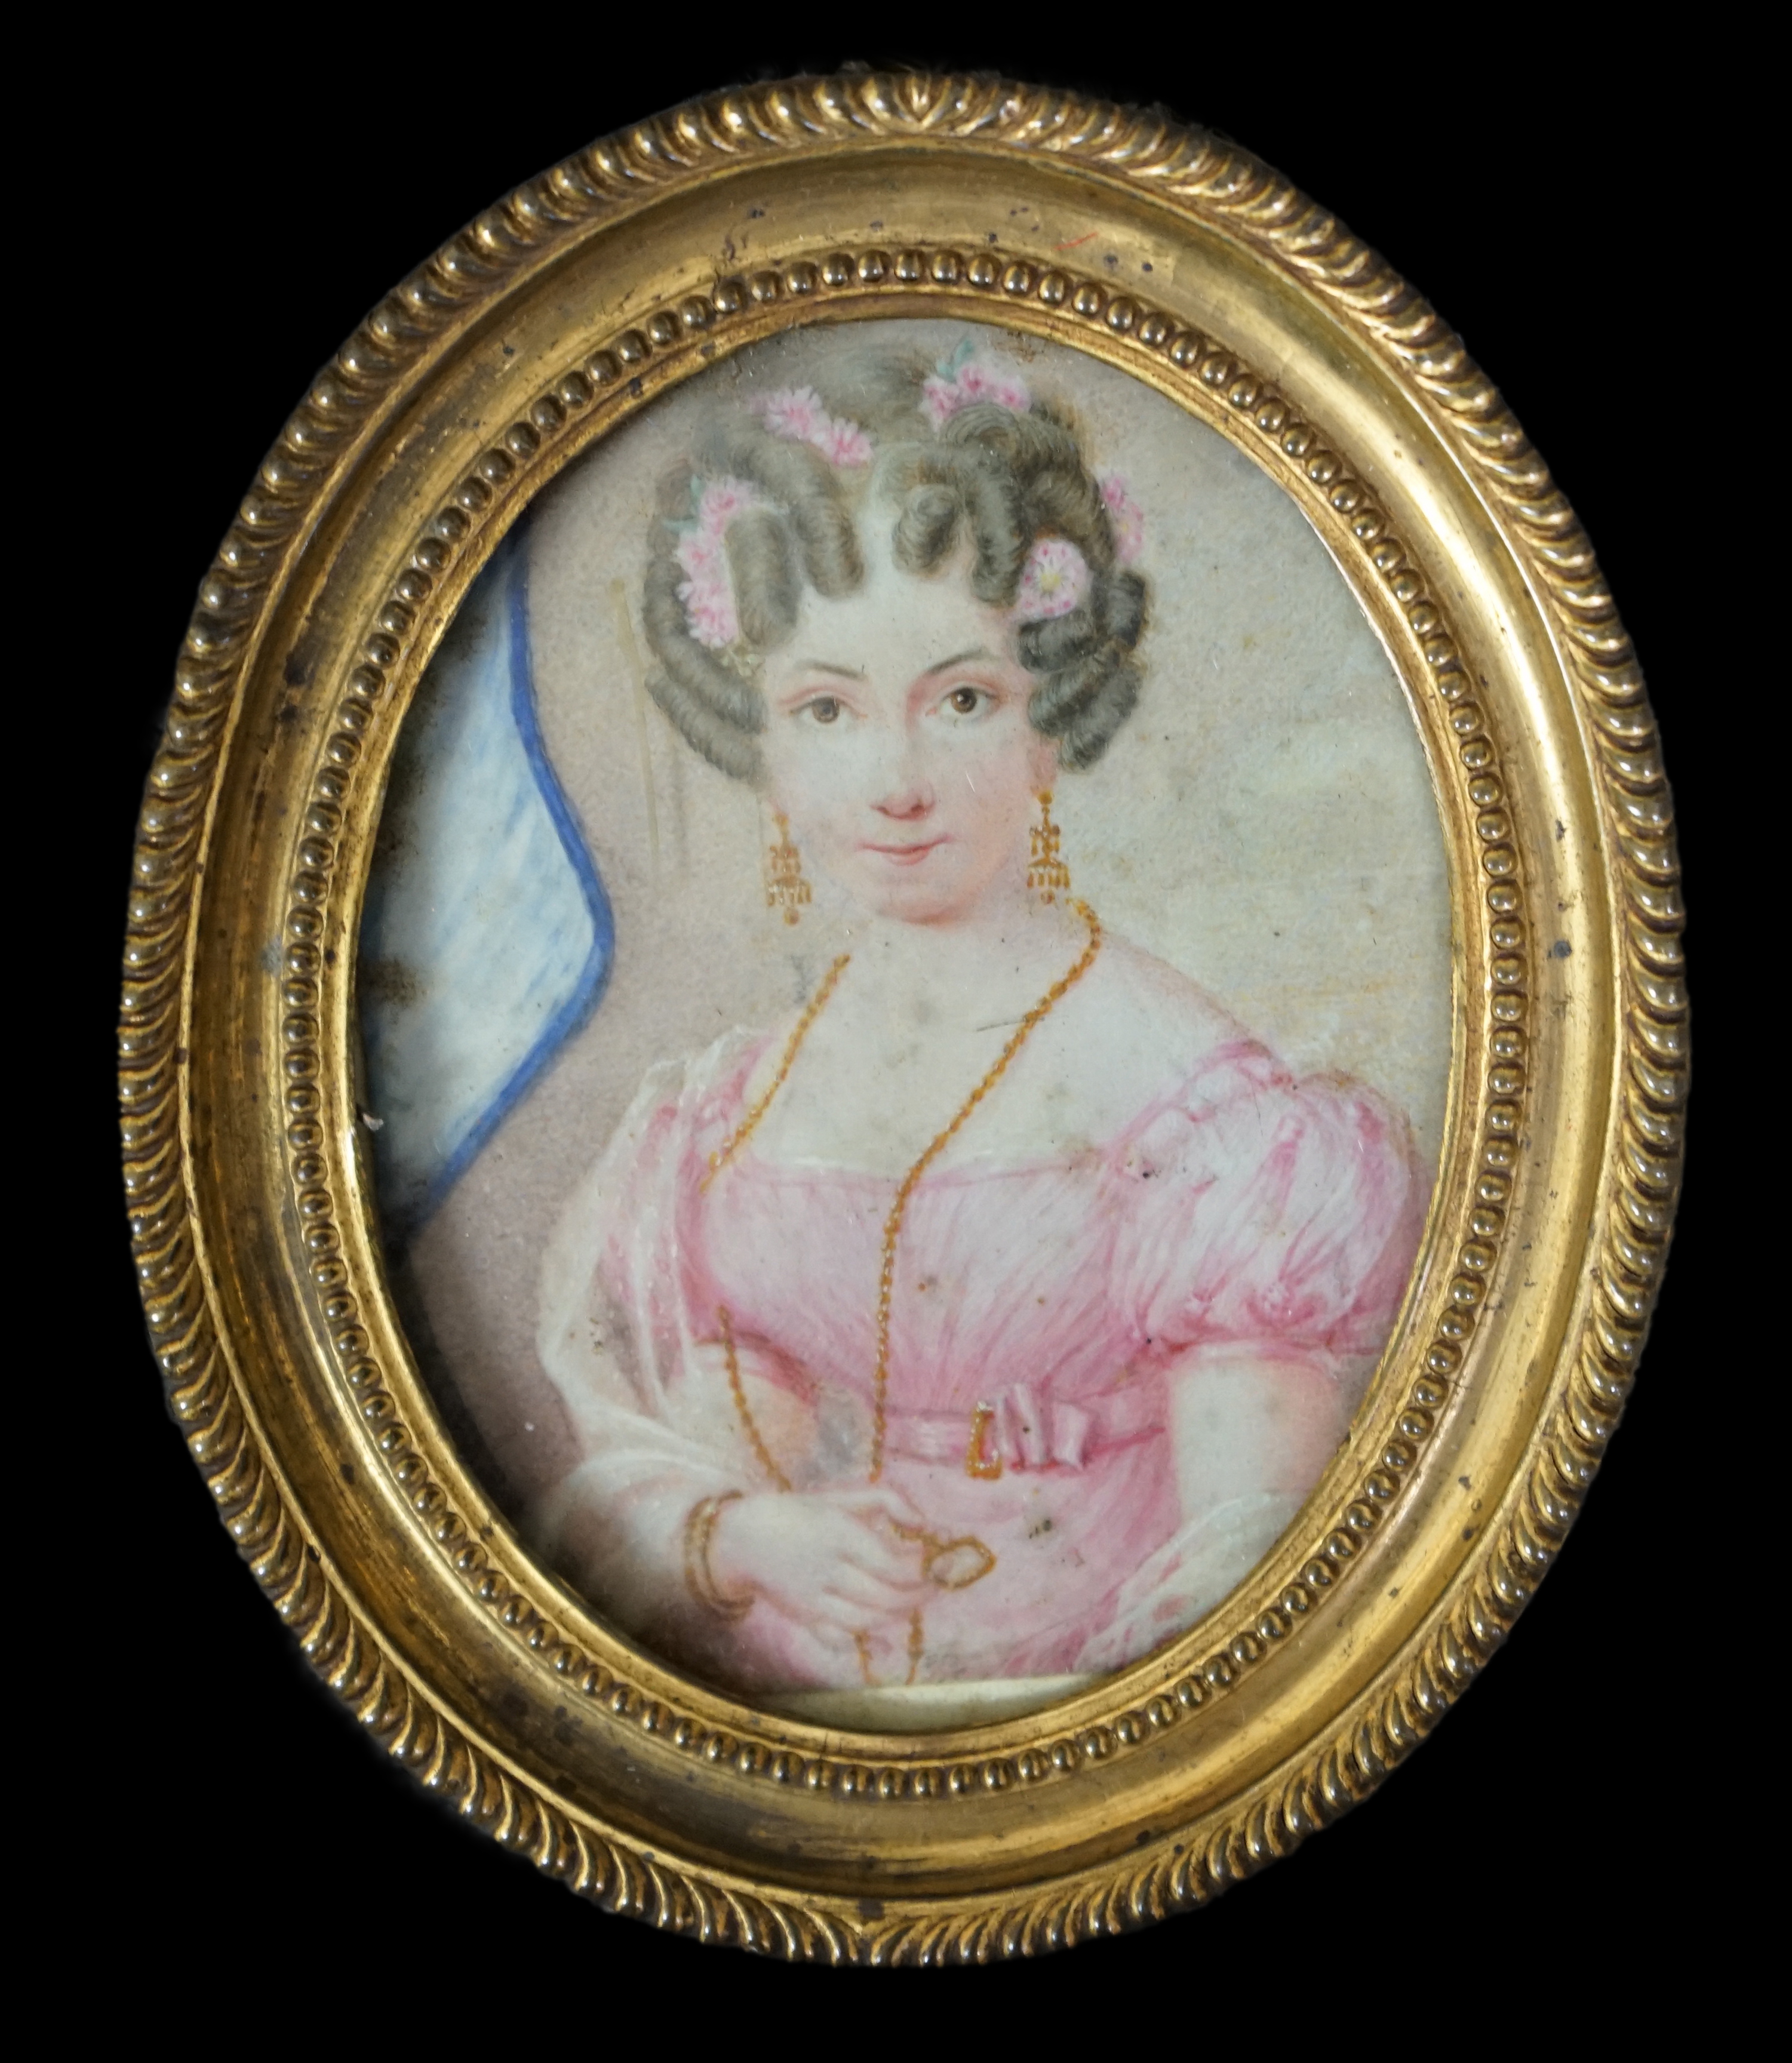 19th century French School, Portrait miniature of the actress Mademoiselle Vestris, watercolour on ivory, 9 x 7cm. CITES Submission reference Q2MK4M57